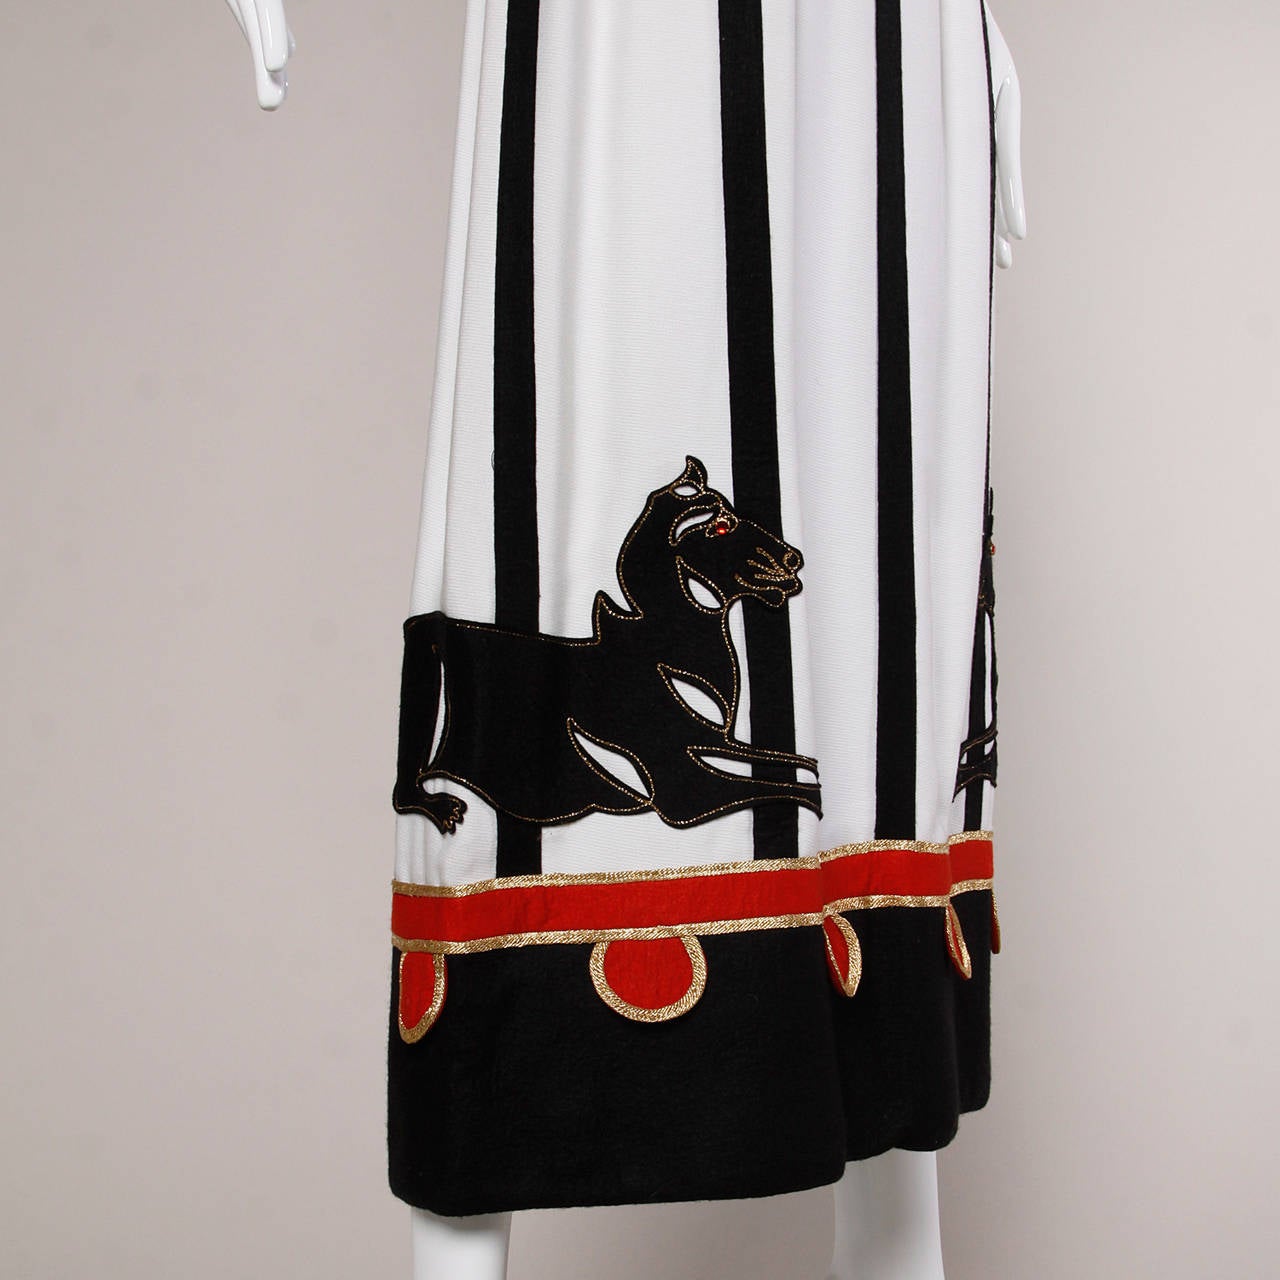 Iconic 1970s Malcolm Starr Attributed Vintage Circus Dress in Unworn Condition 1